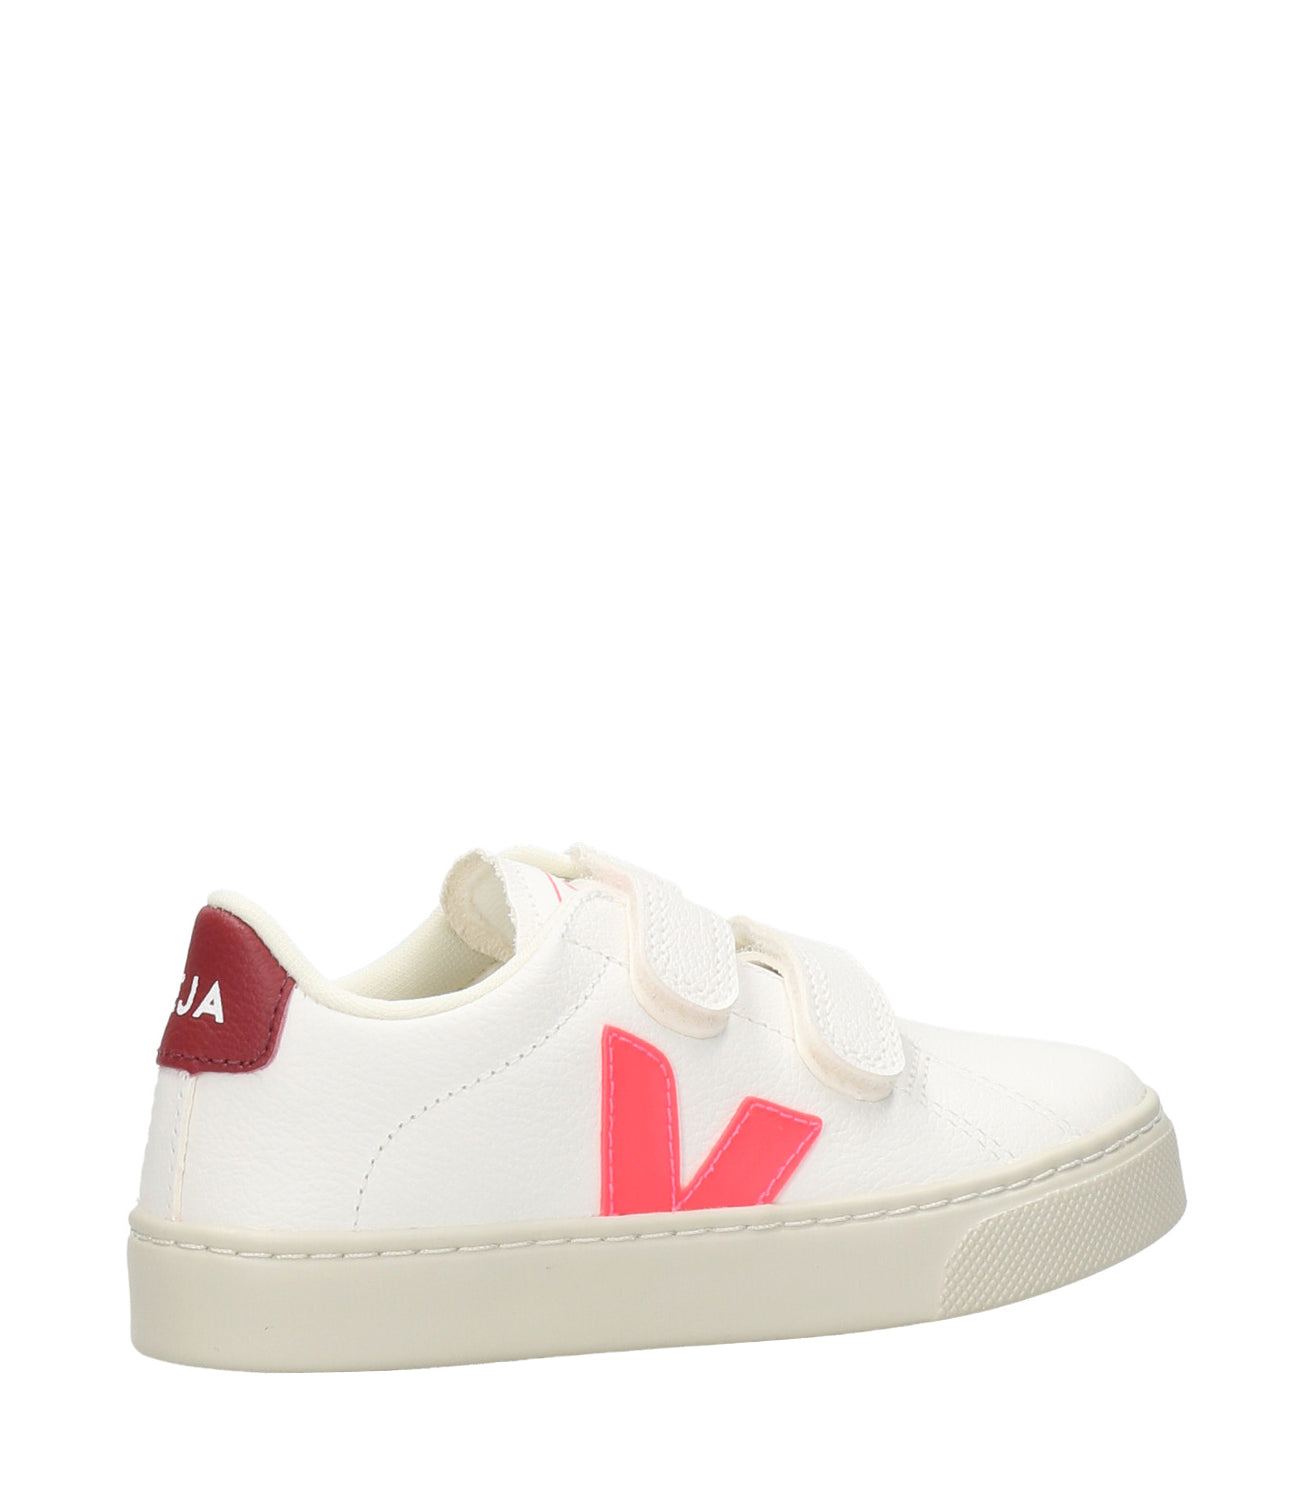 Veja Kids | Chromefree Sneakers White, Fluorescent Pink and Bordeaux